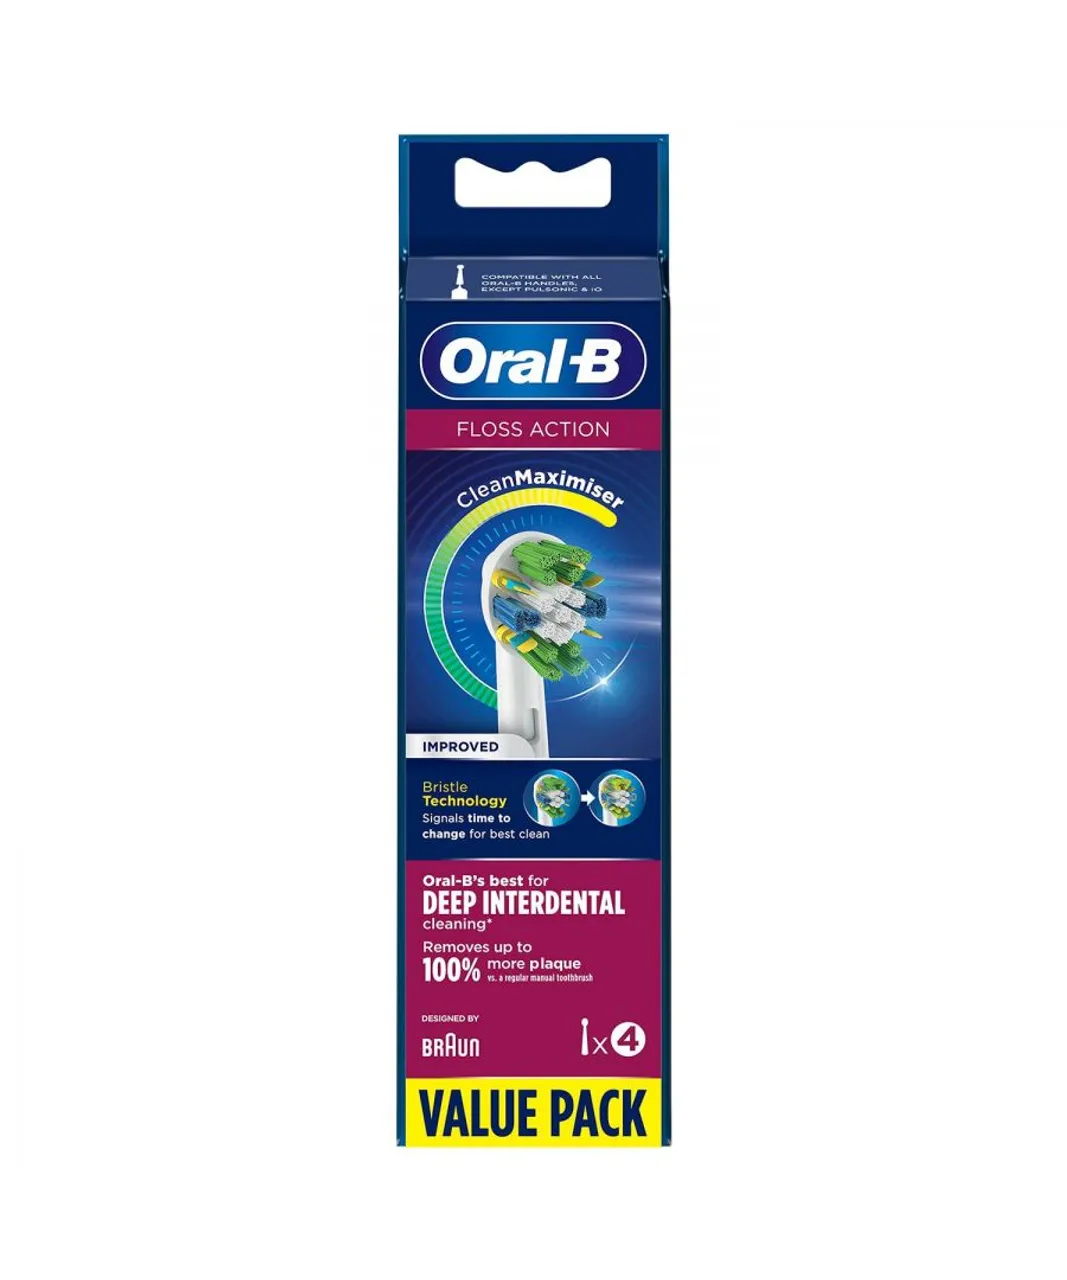 Oral B Unisex Oral-B Floss Action Replacement Toothbrush Head with Clean Maximiser, Pk of 4 - Green - One Size